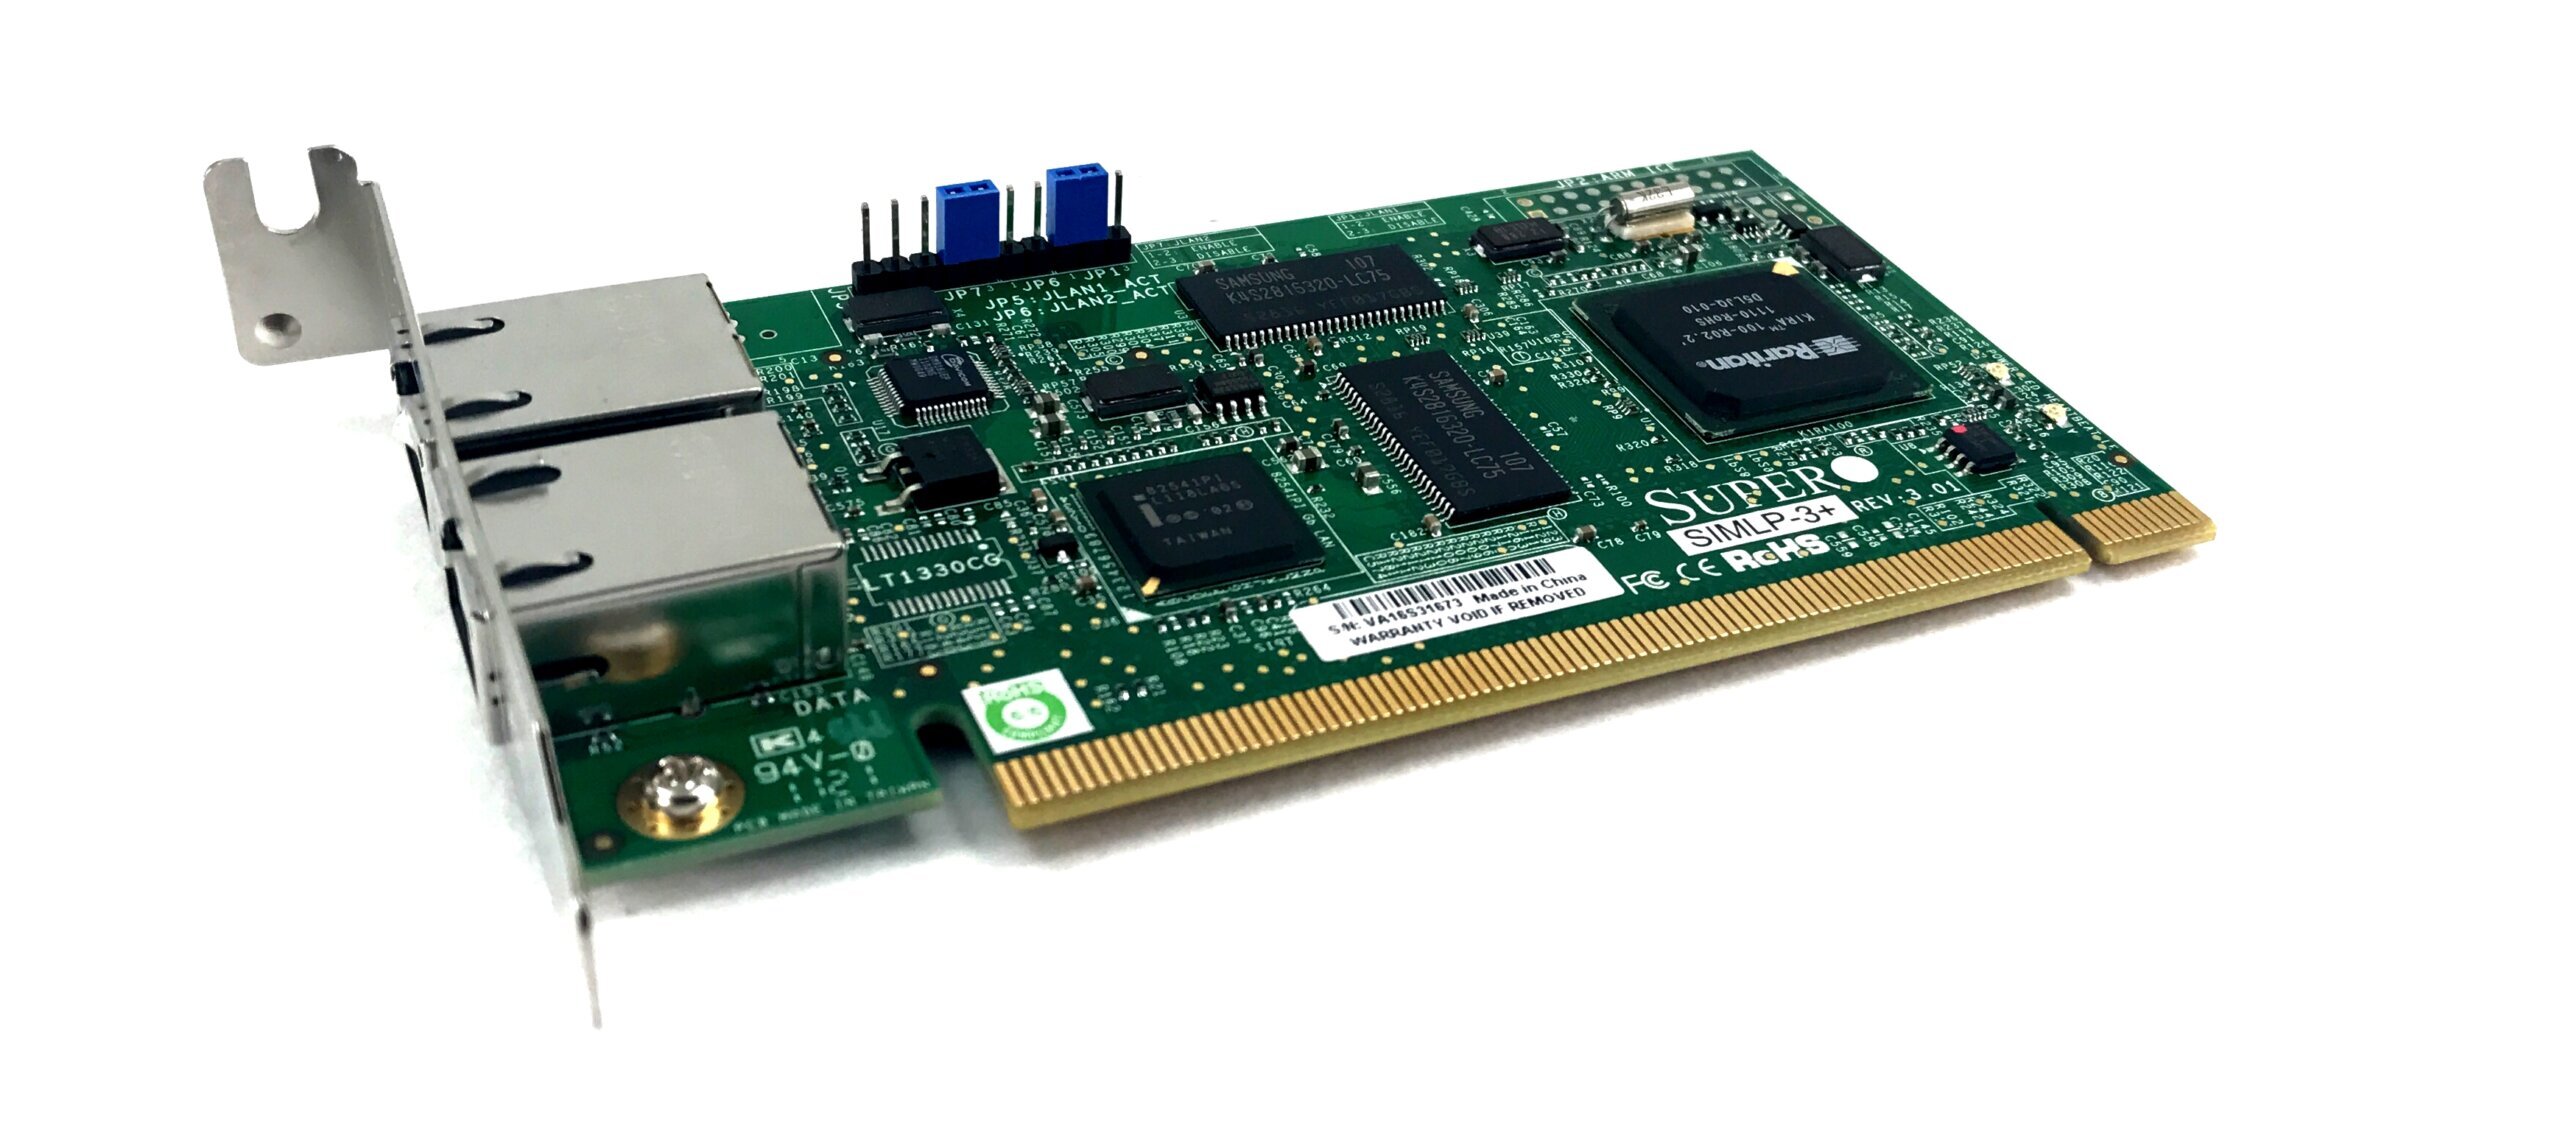 Supermicro IPMI 2.0 Server Remote Management Adapter Card